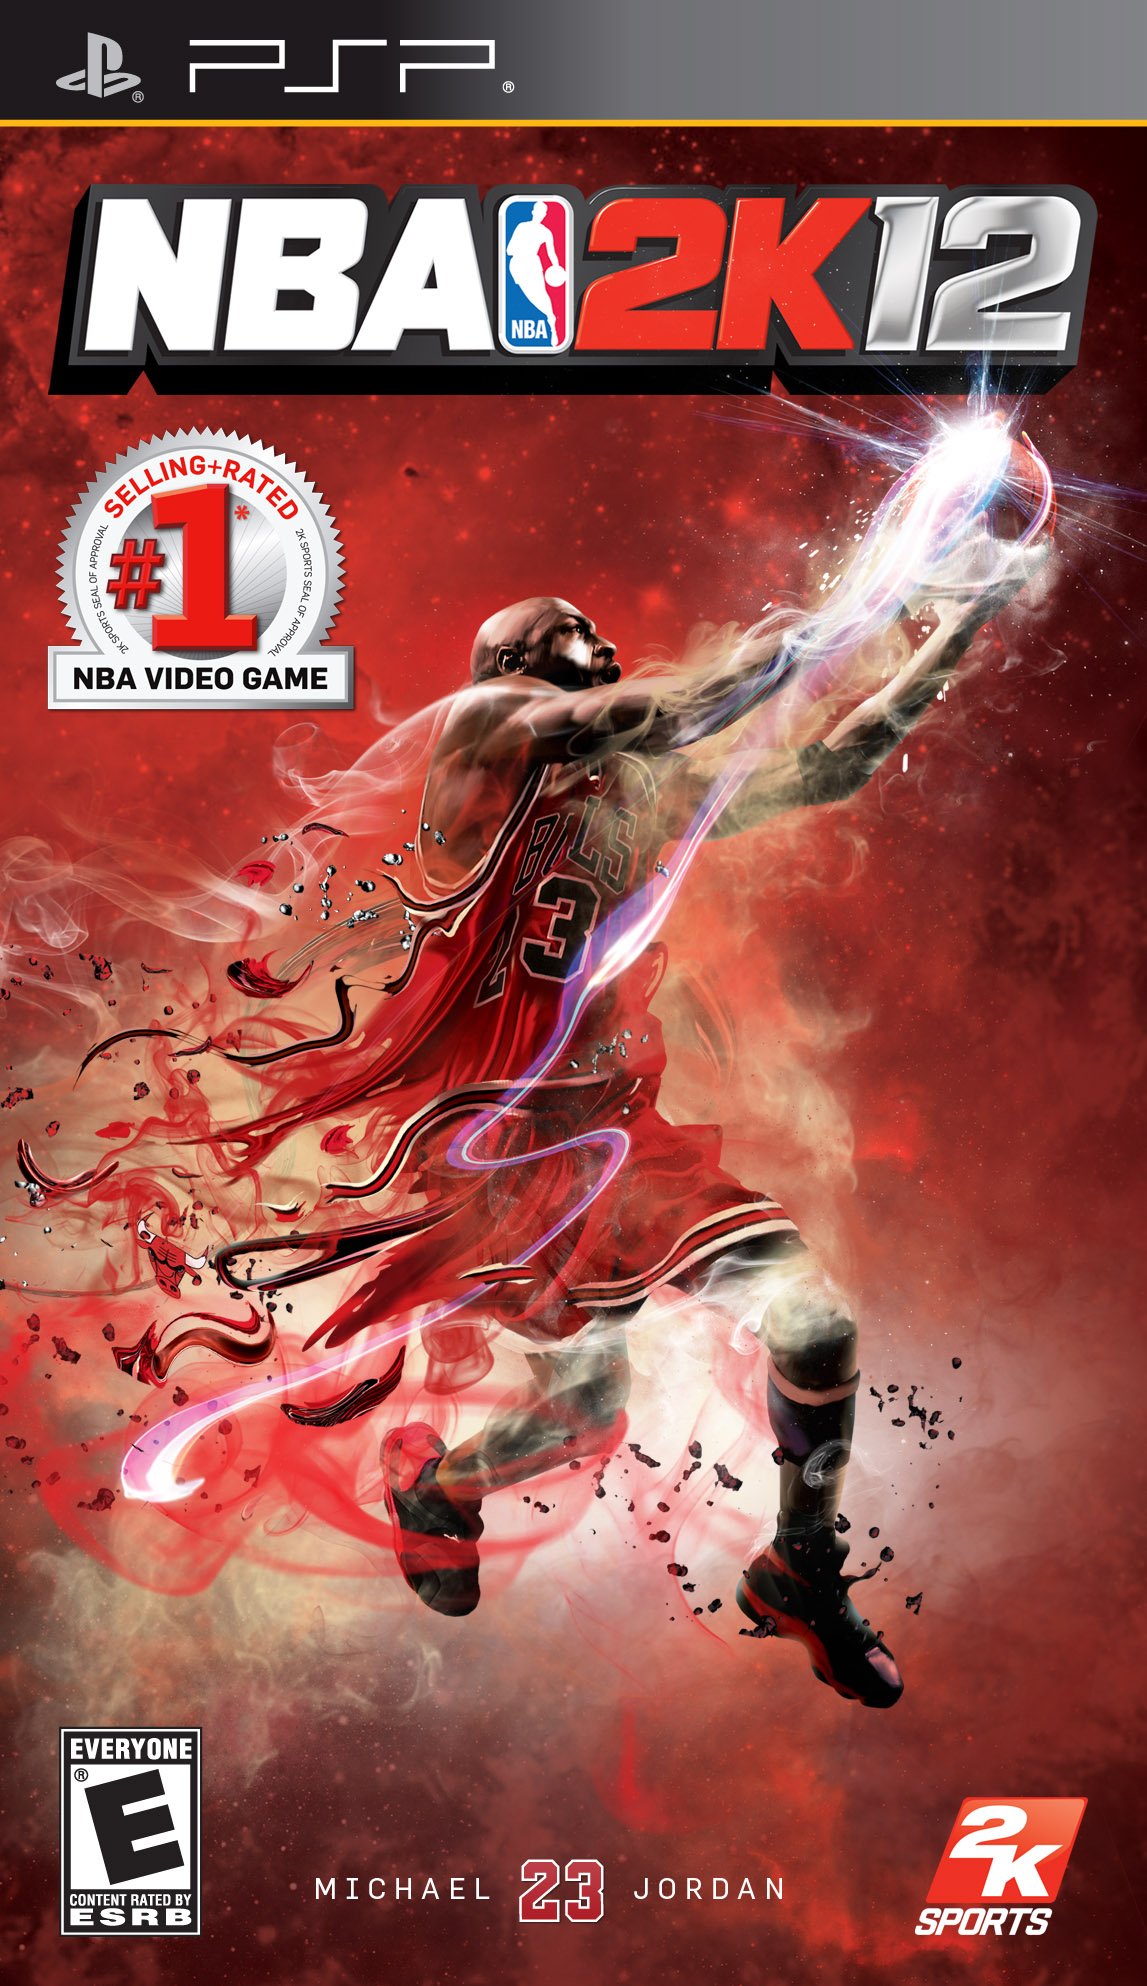 NBA 2K12 Release Date (Xbox 360, PS3, PC, Wii, PSP)